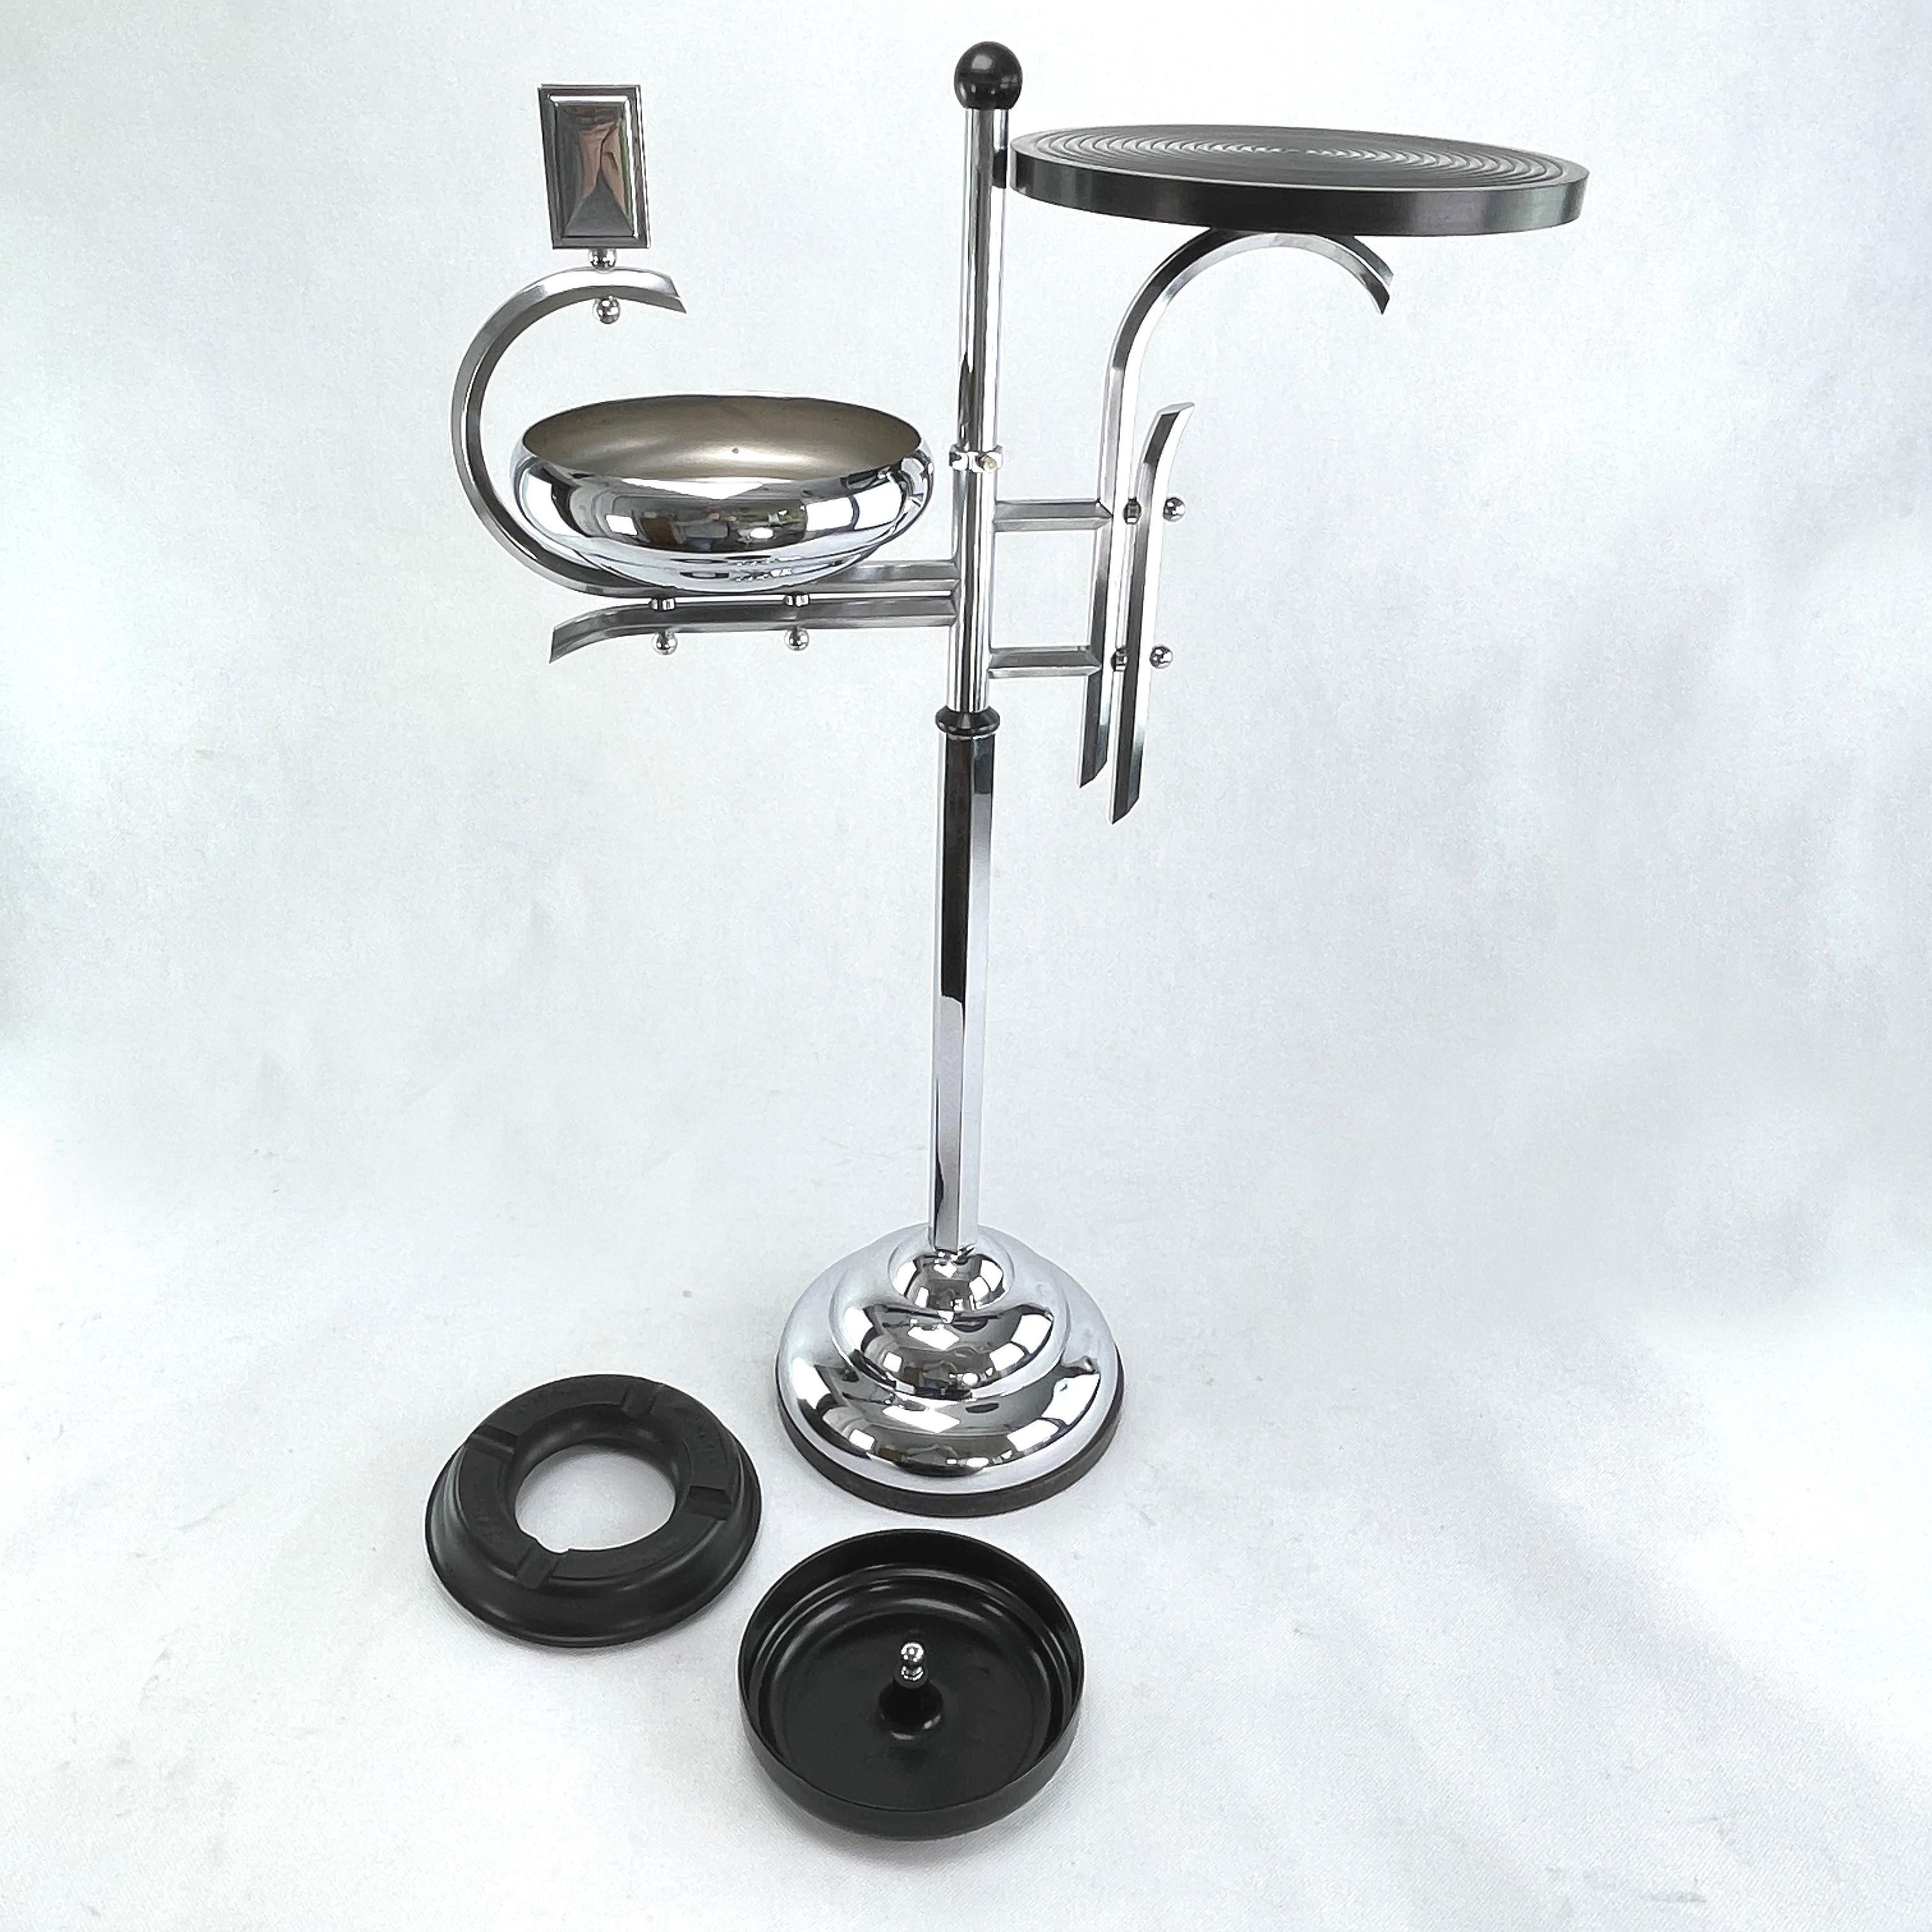 Mid-20th Century Art Deco Ashtray Stand, Chrome and Bakelite by Demeyere, Belgium, 1930s For Sale